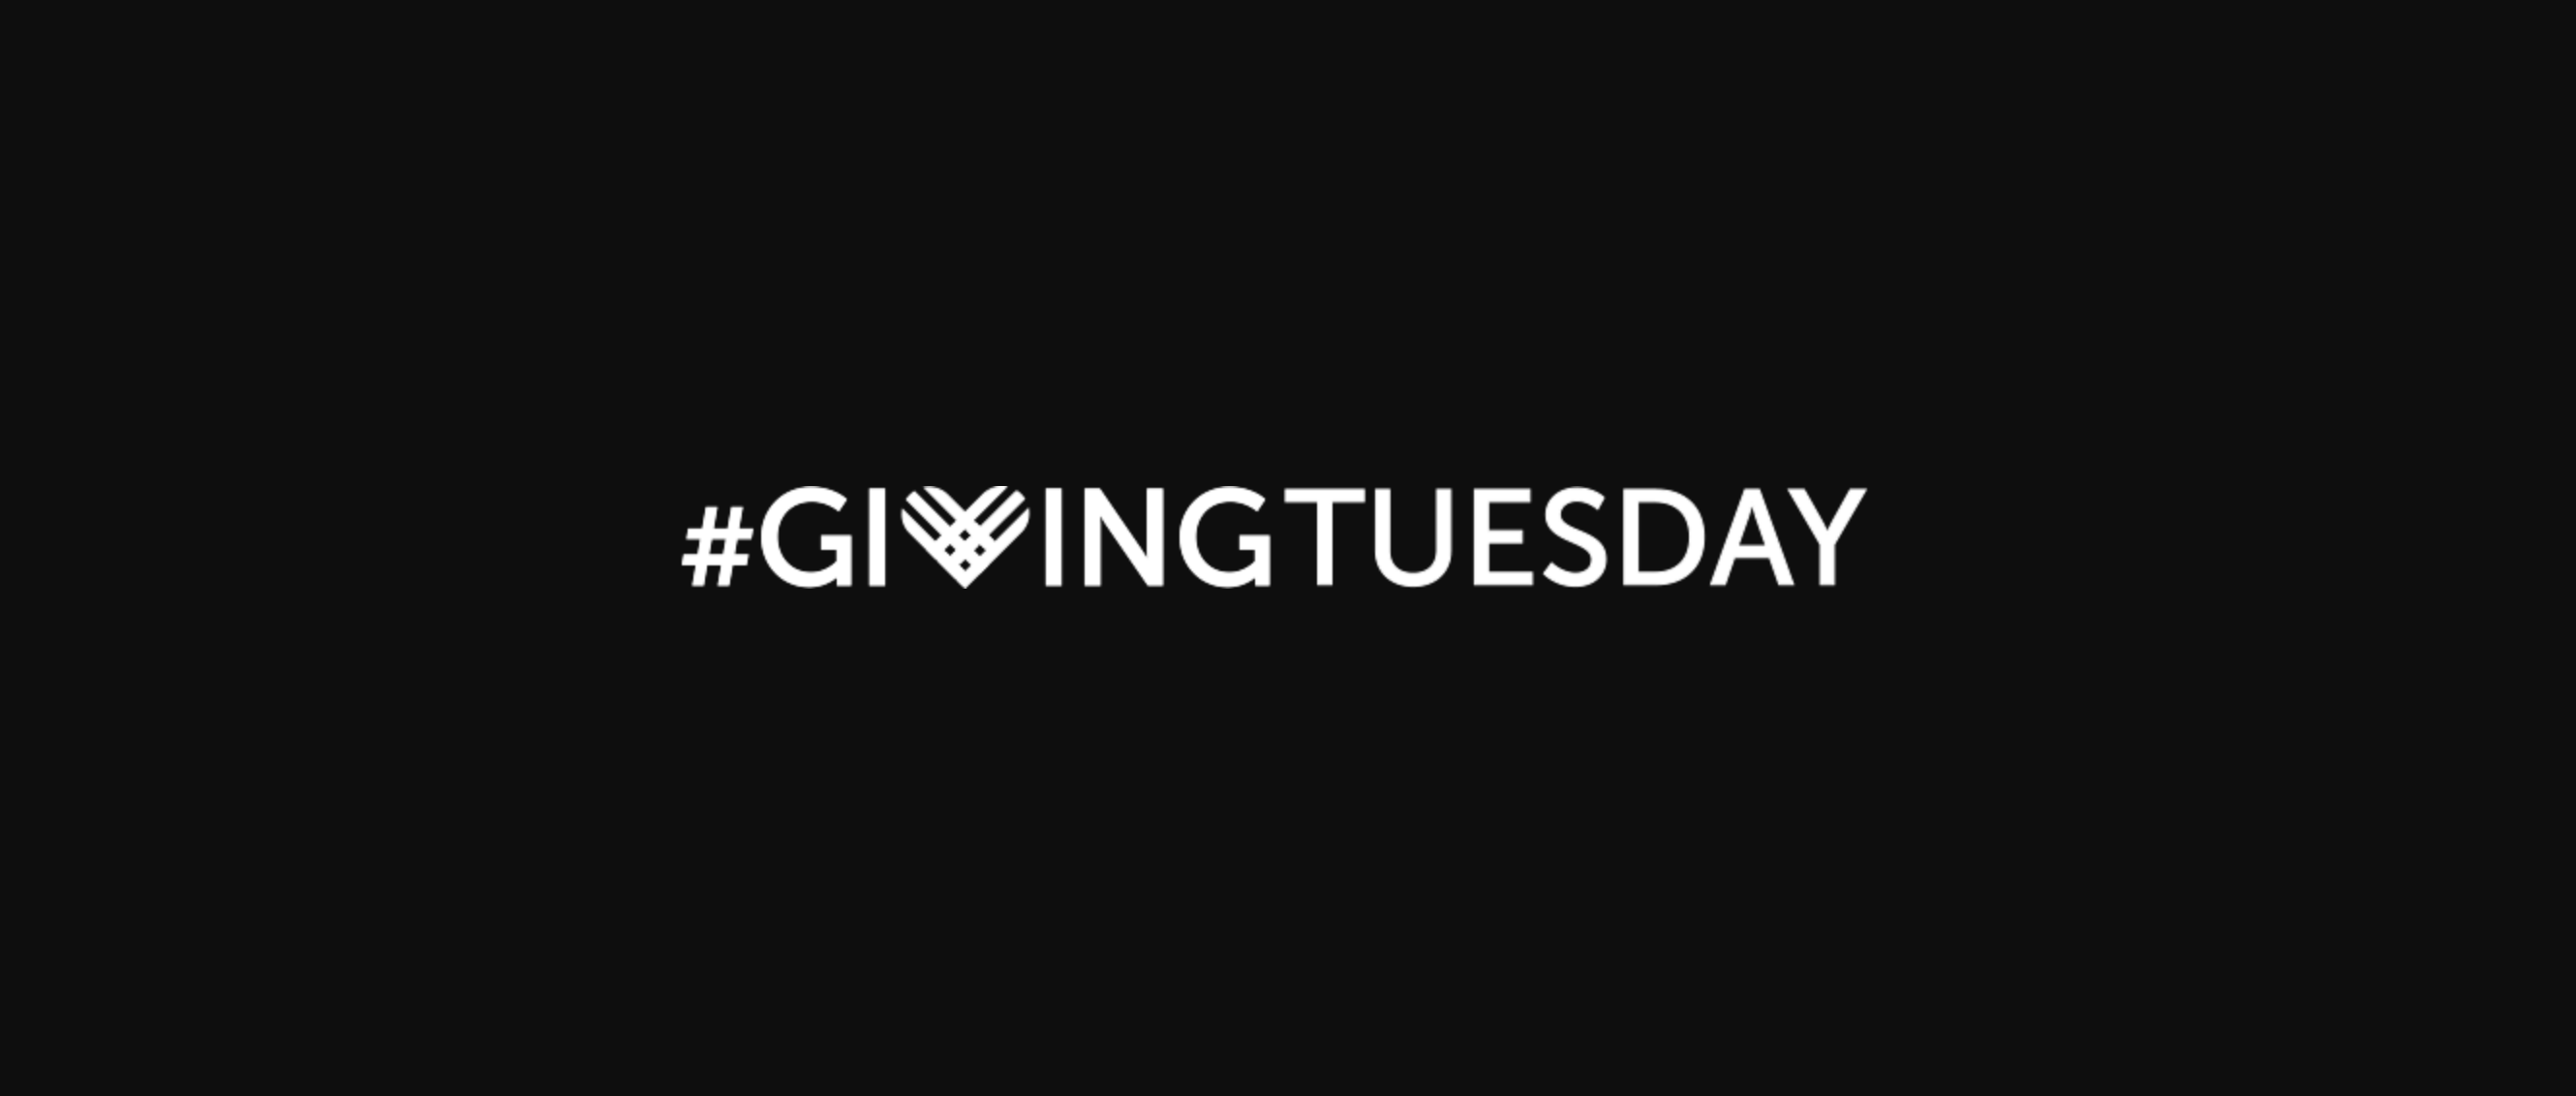 Black background with the word in white #GivingTuesday